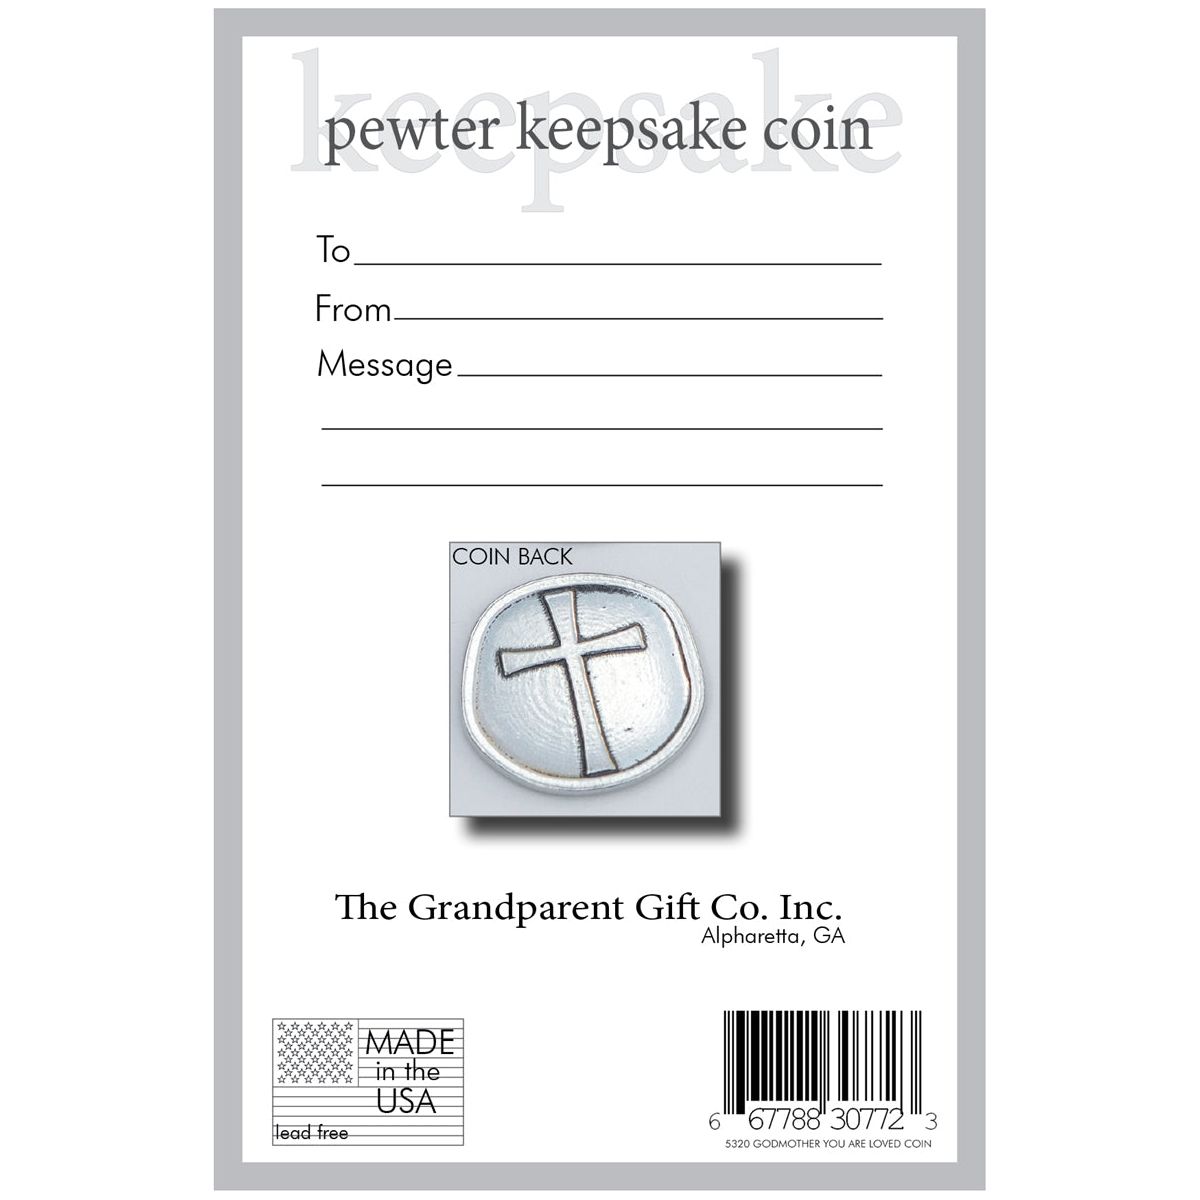 Godmother Gift: Handmade Pewter Coin